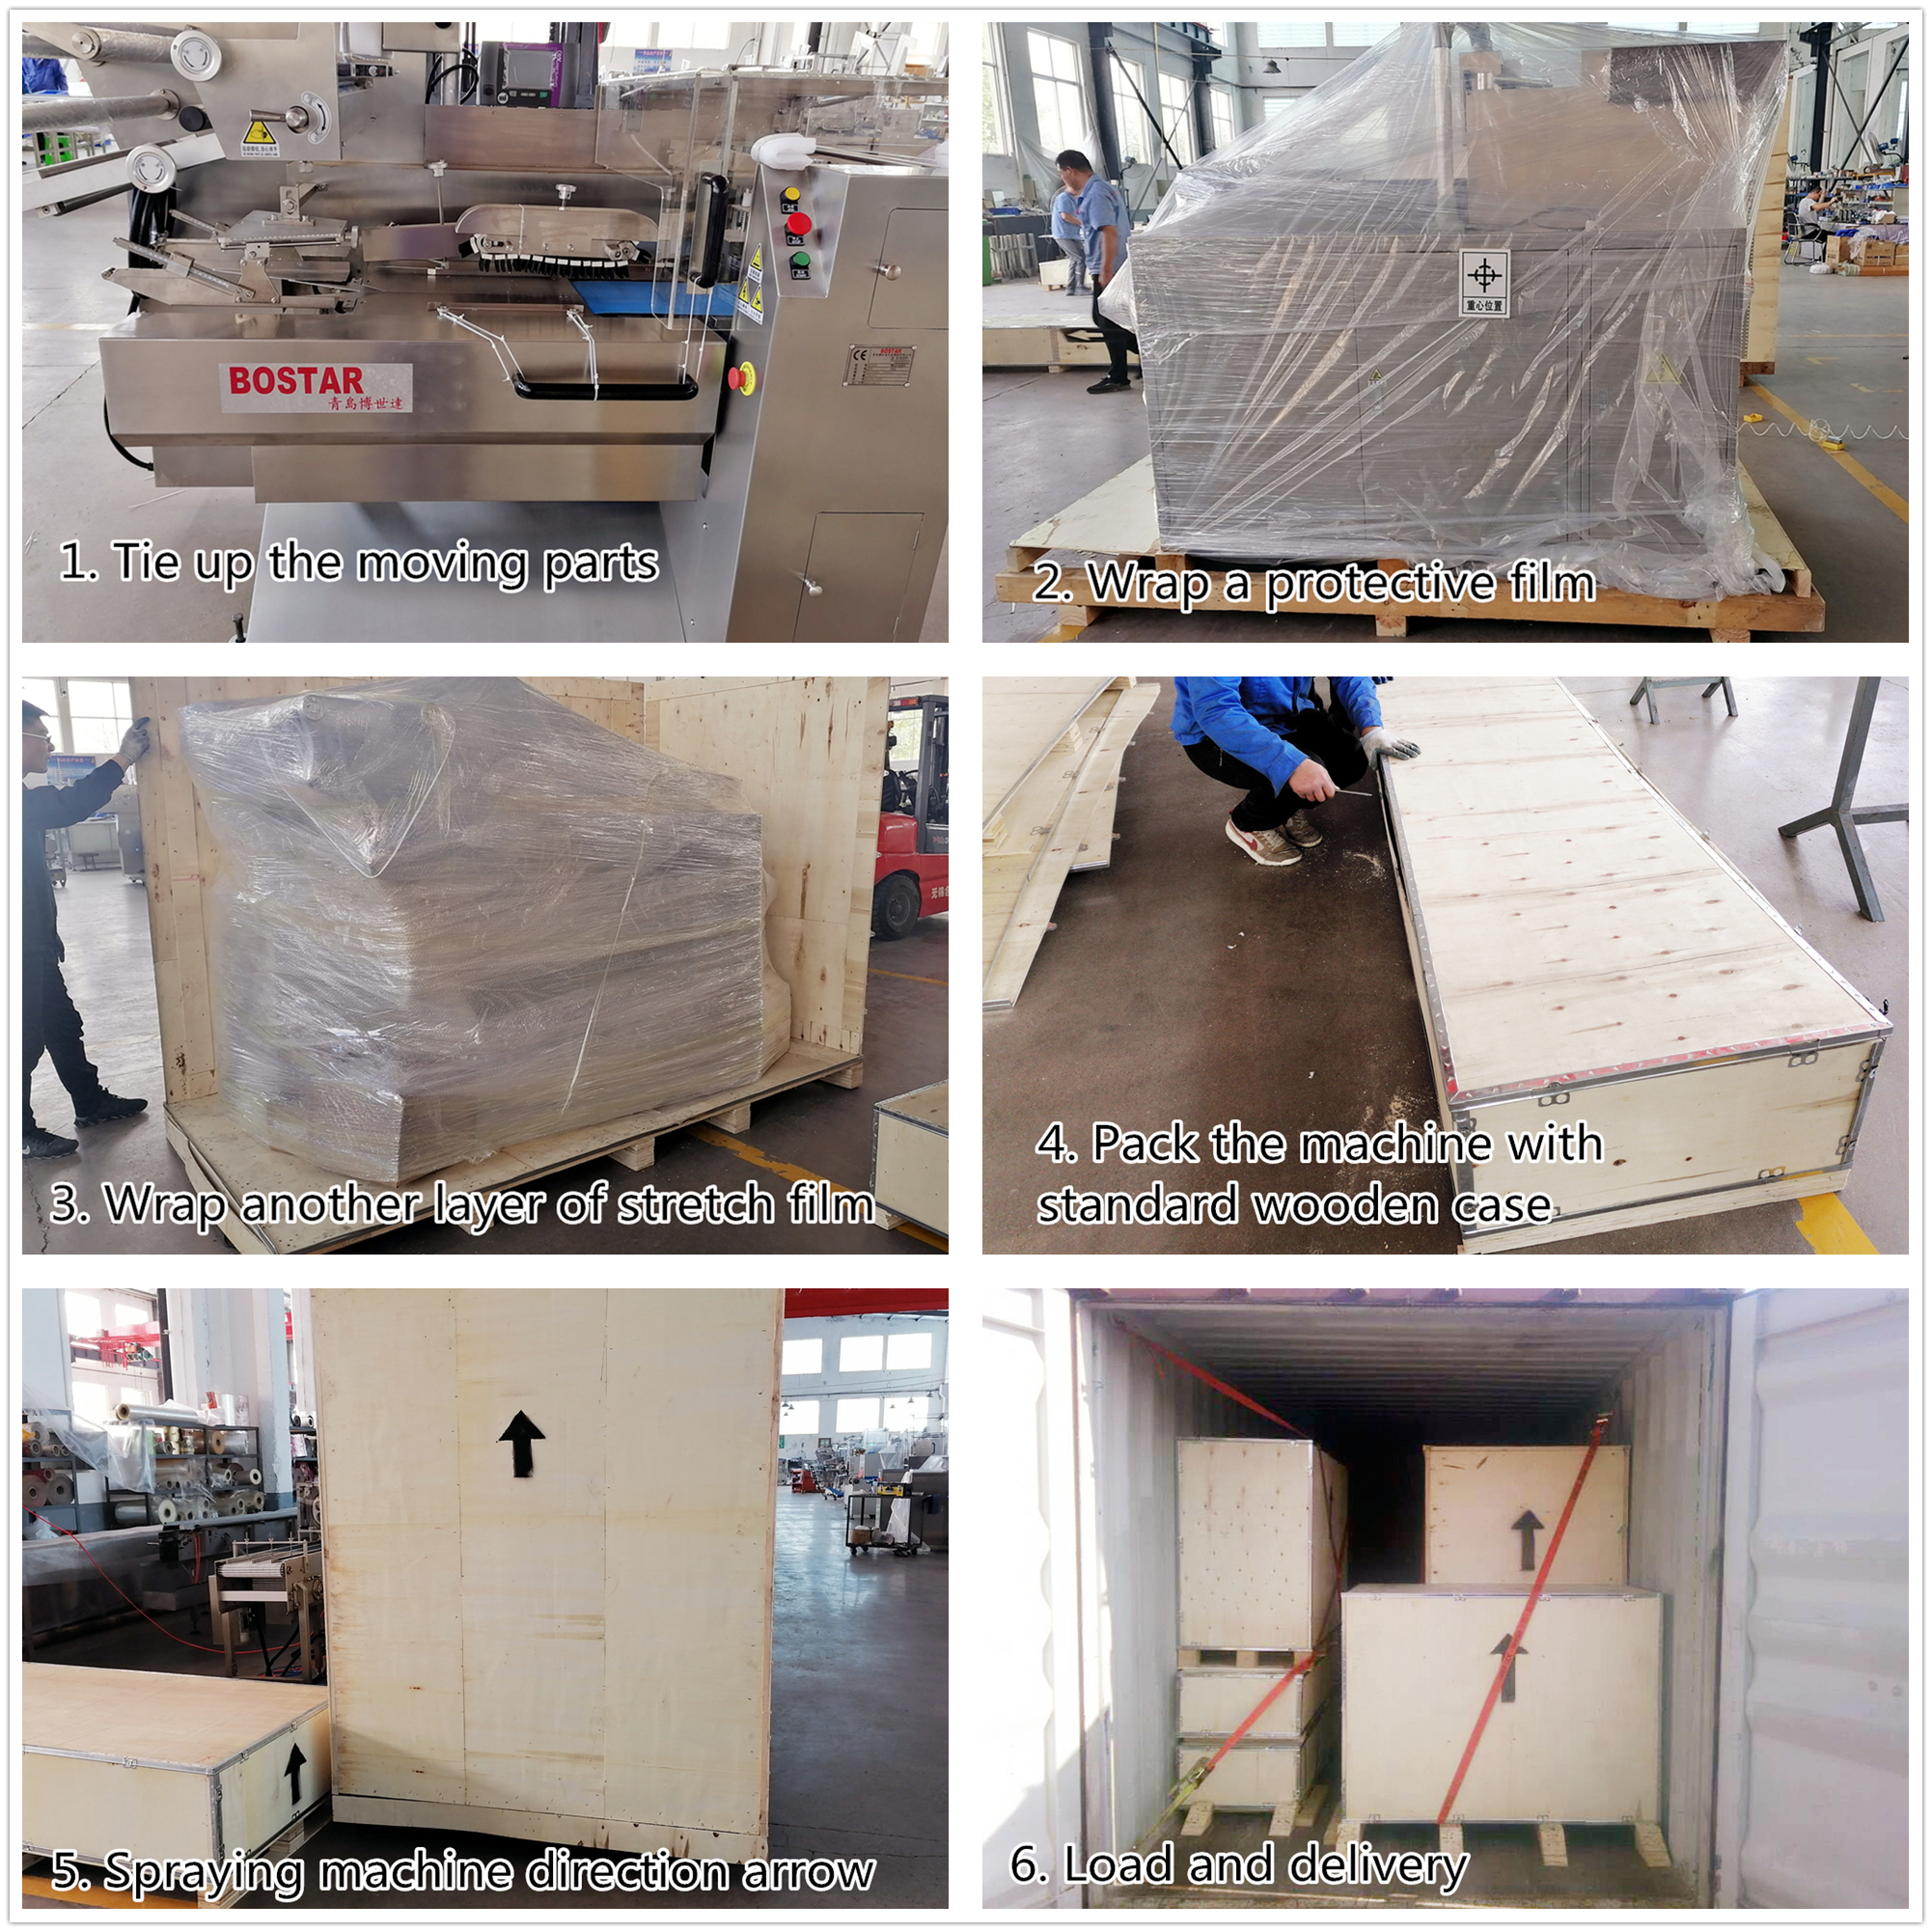 packing and delivery of pasta packing machine